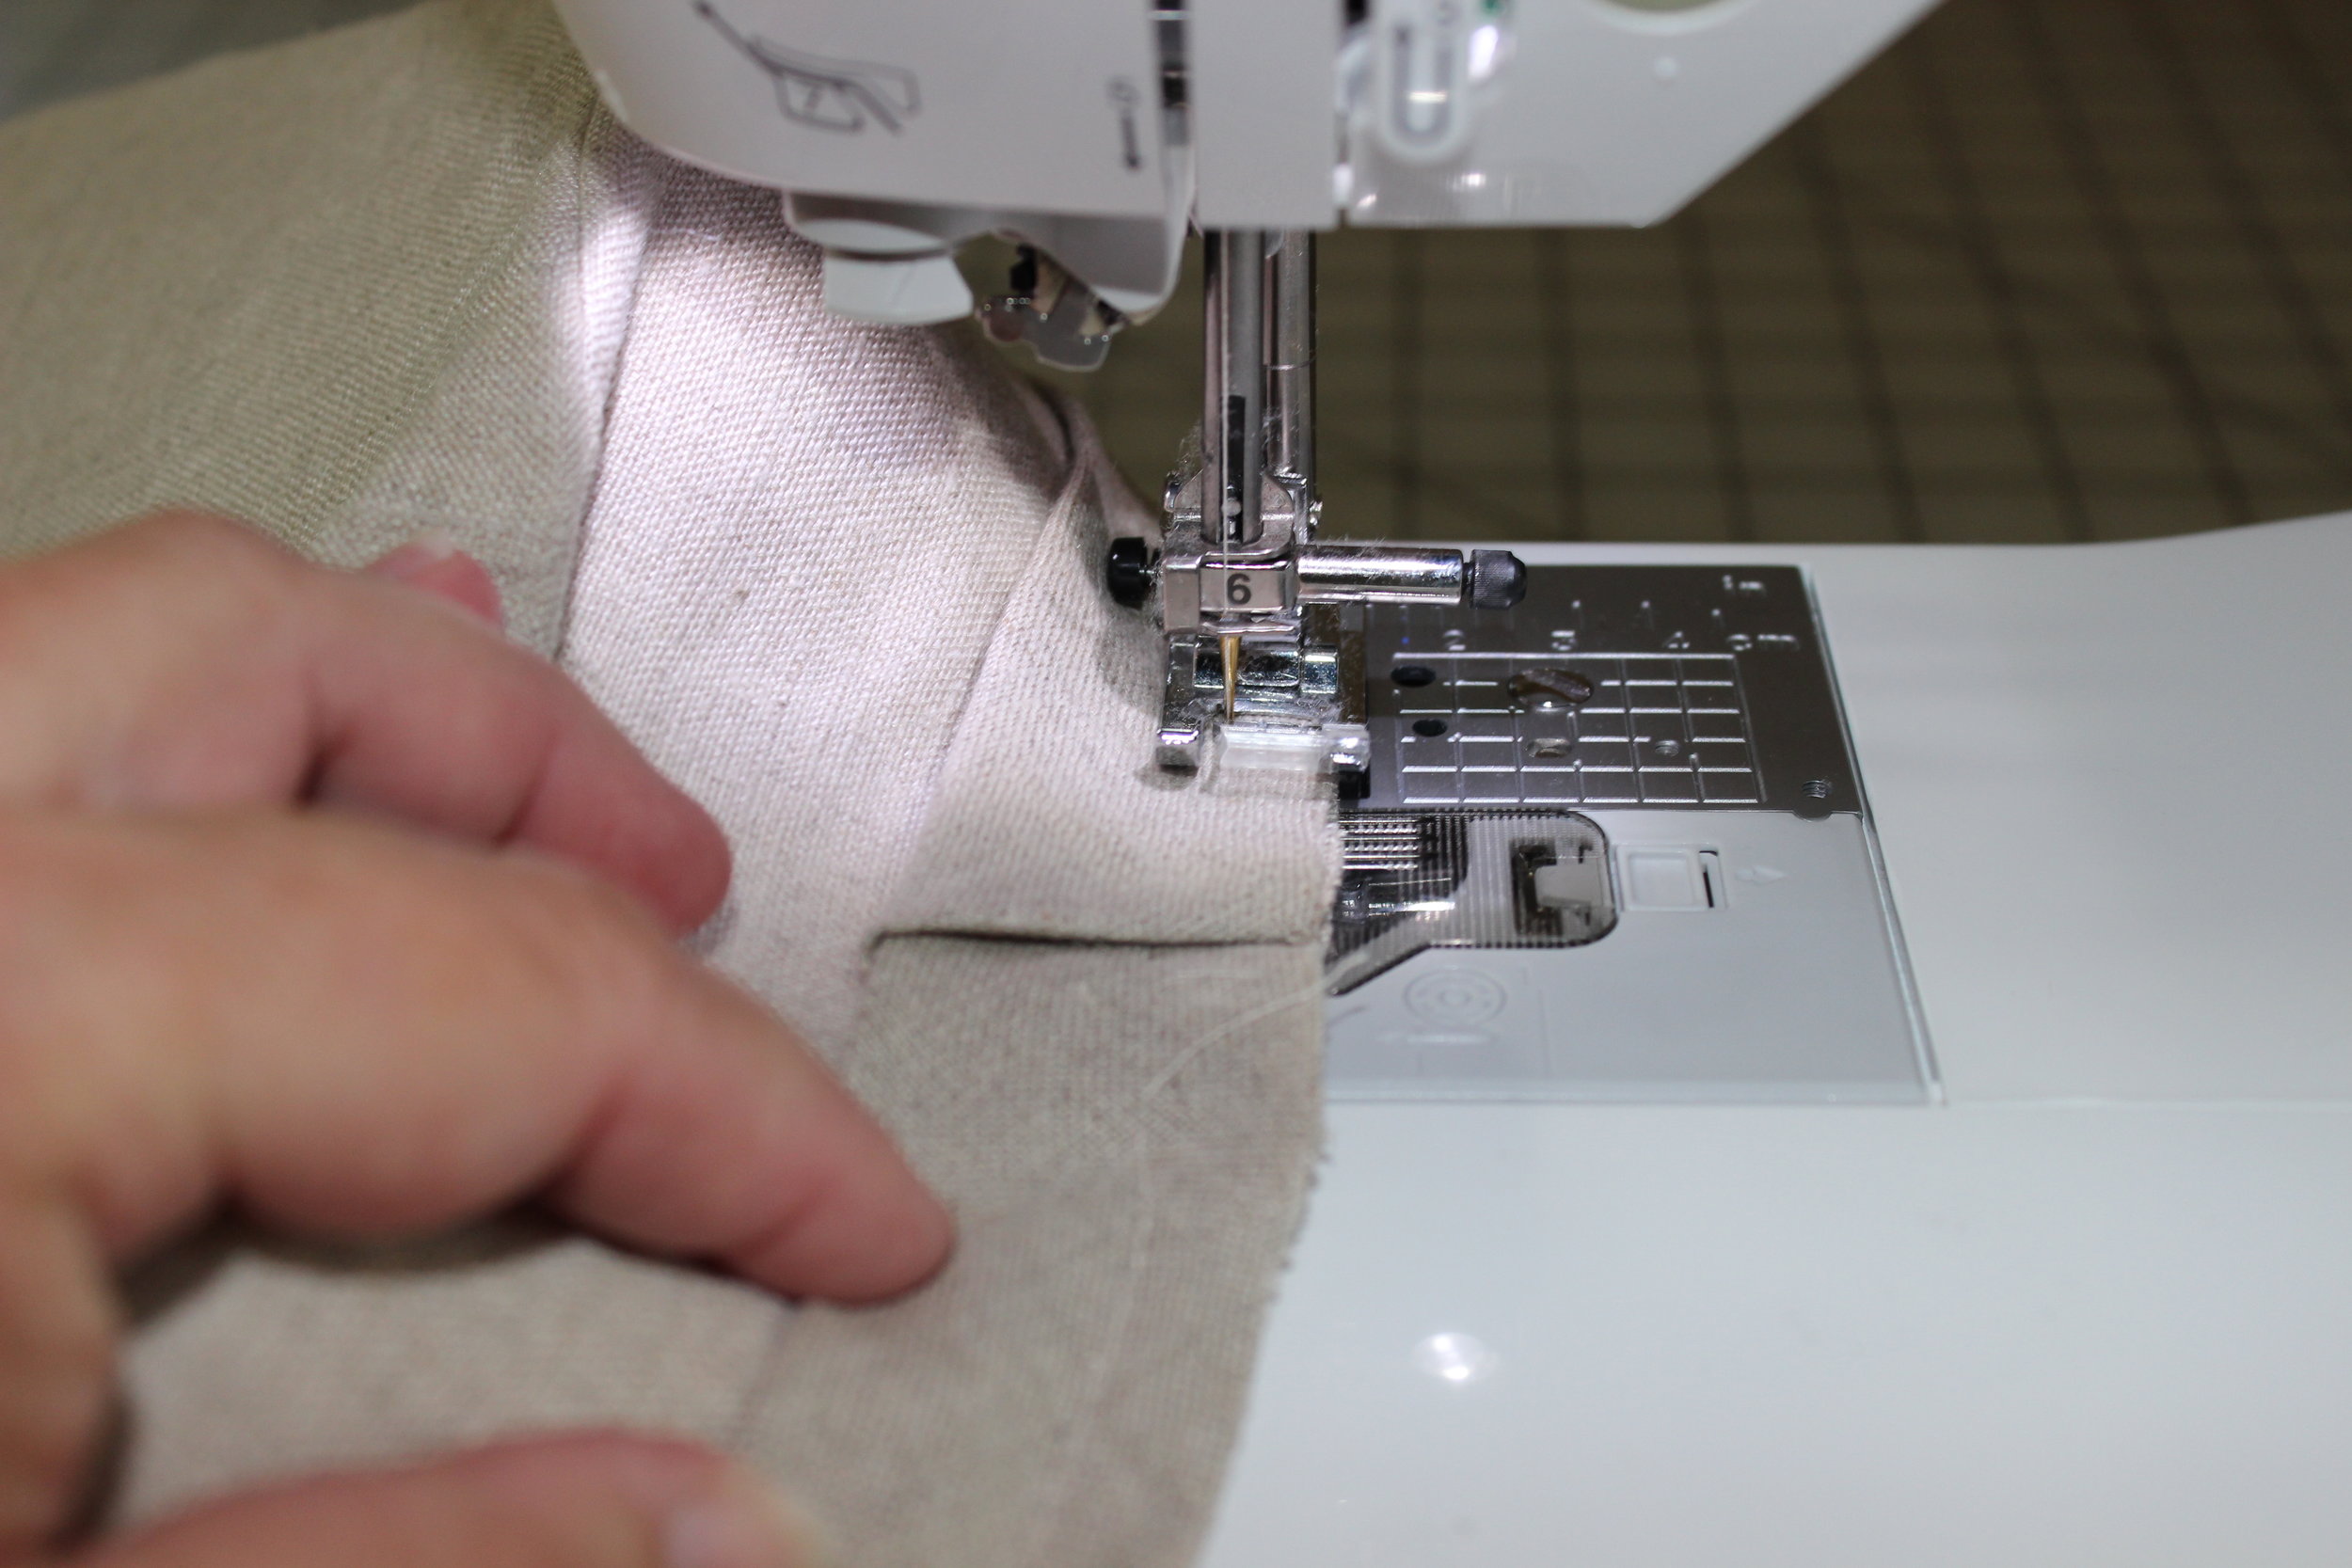 Shannon Sews: Fix holes in gauze or lightweight fabric